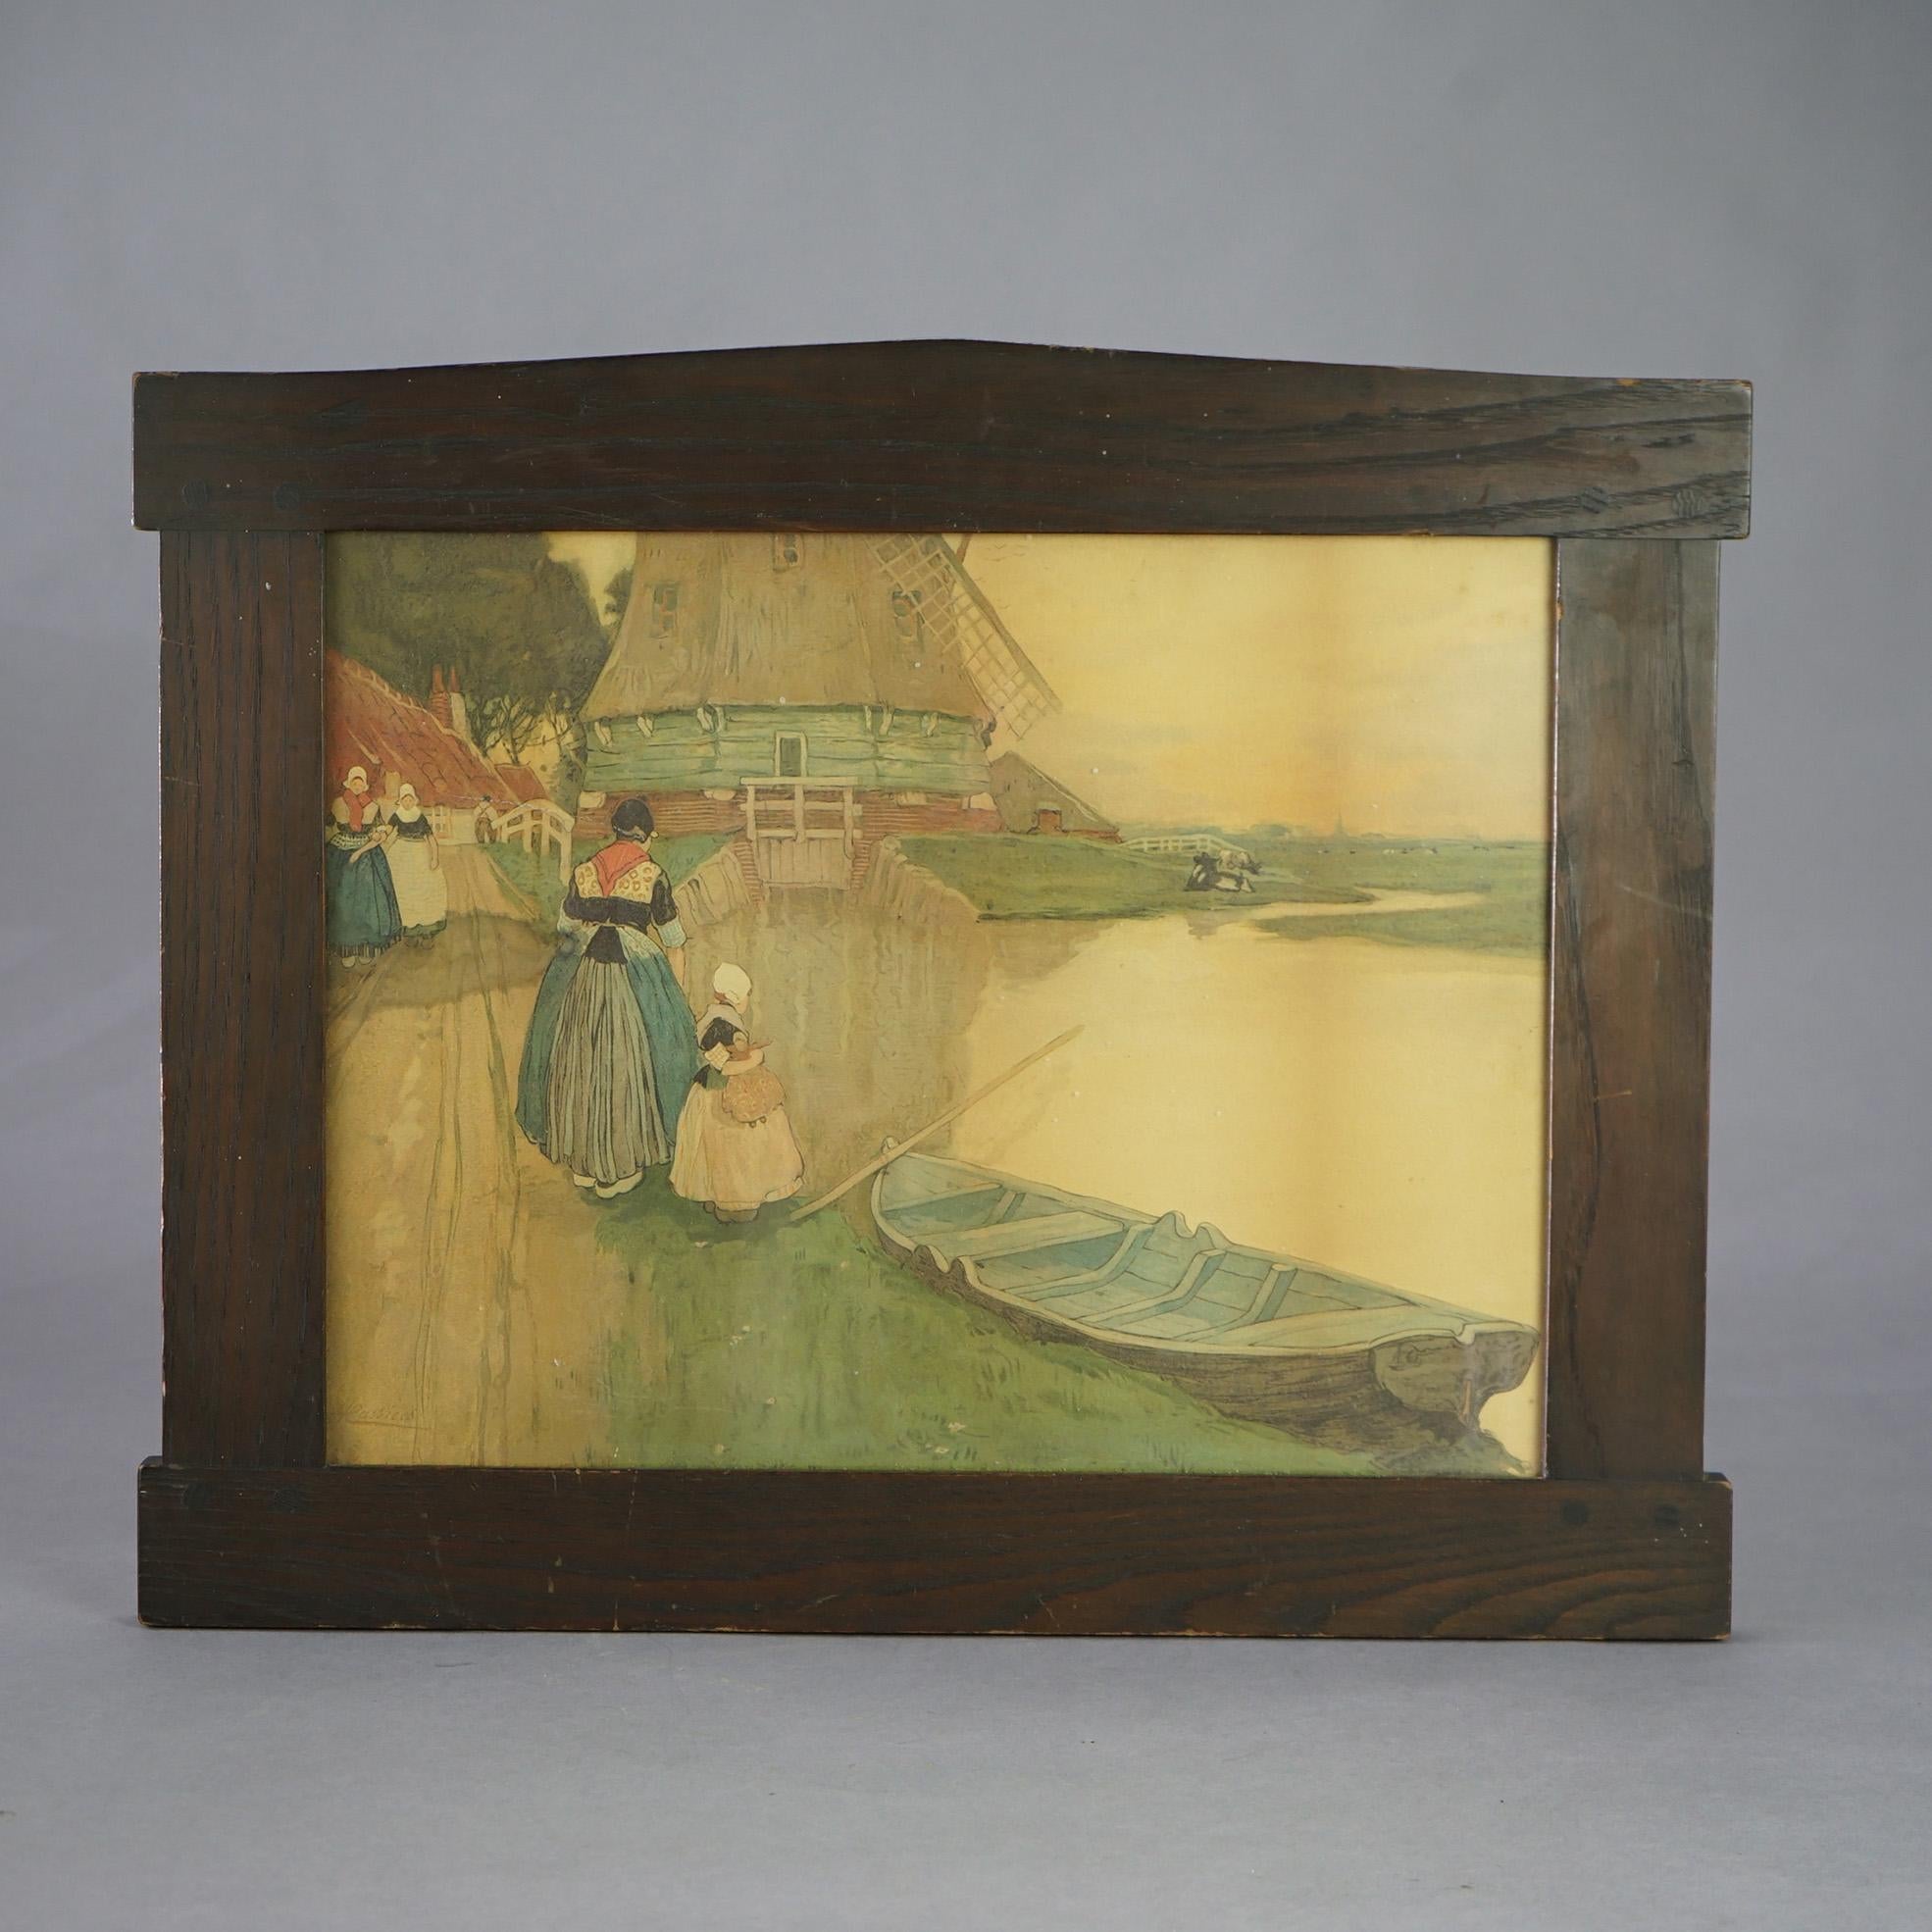 Antique Arts & Crafts Oak Art or Picture Frame in the Manner of Stickley Circa 1910

Measures - 18